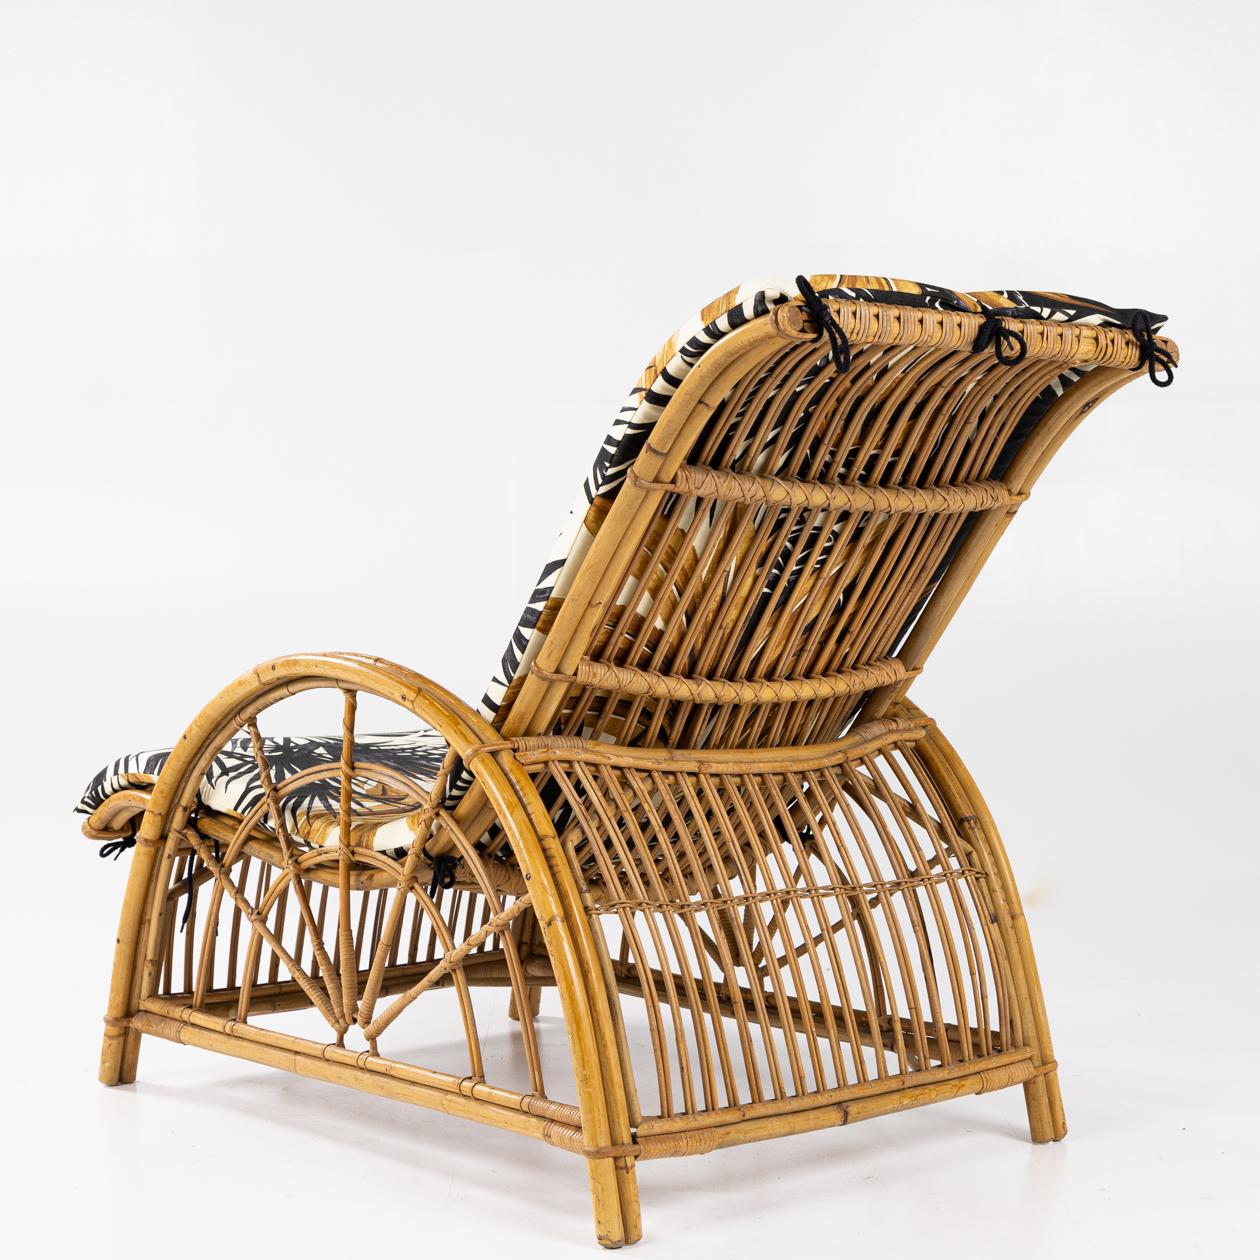 Lounge chair in woven bamboo with cushion in Vainui (colour: Coco) by Pierre Frey. Unknown maker